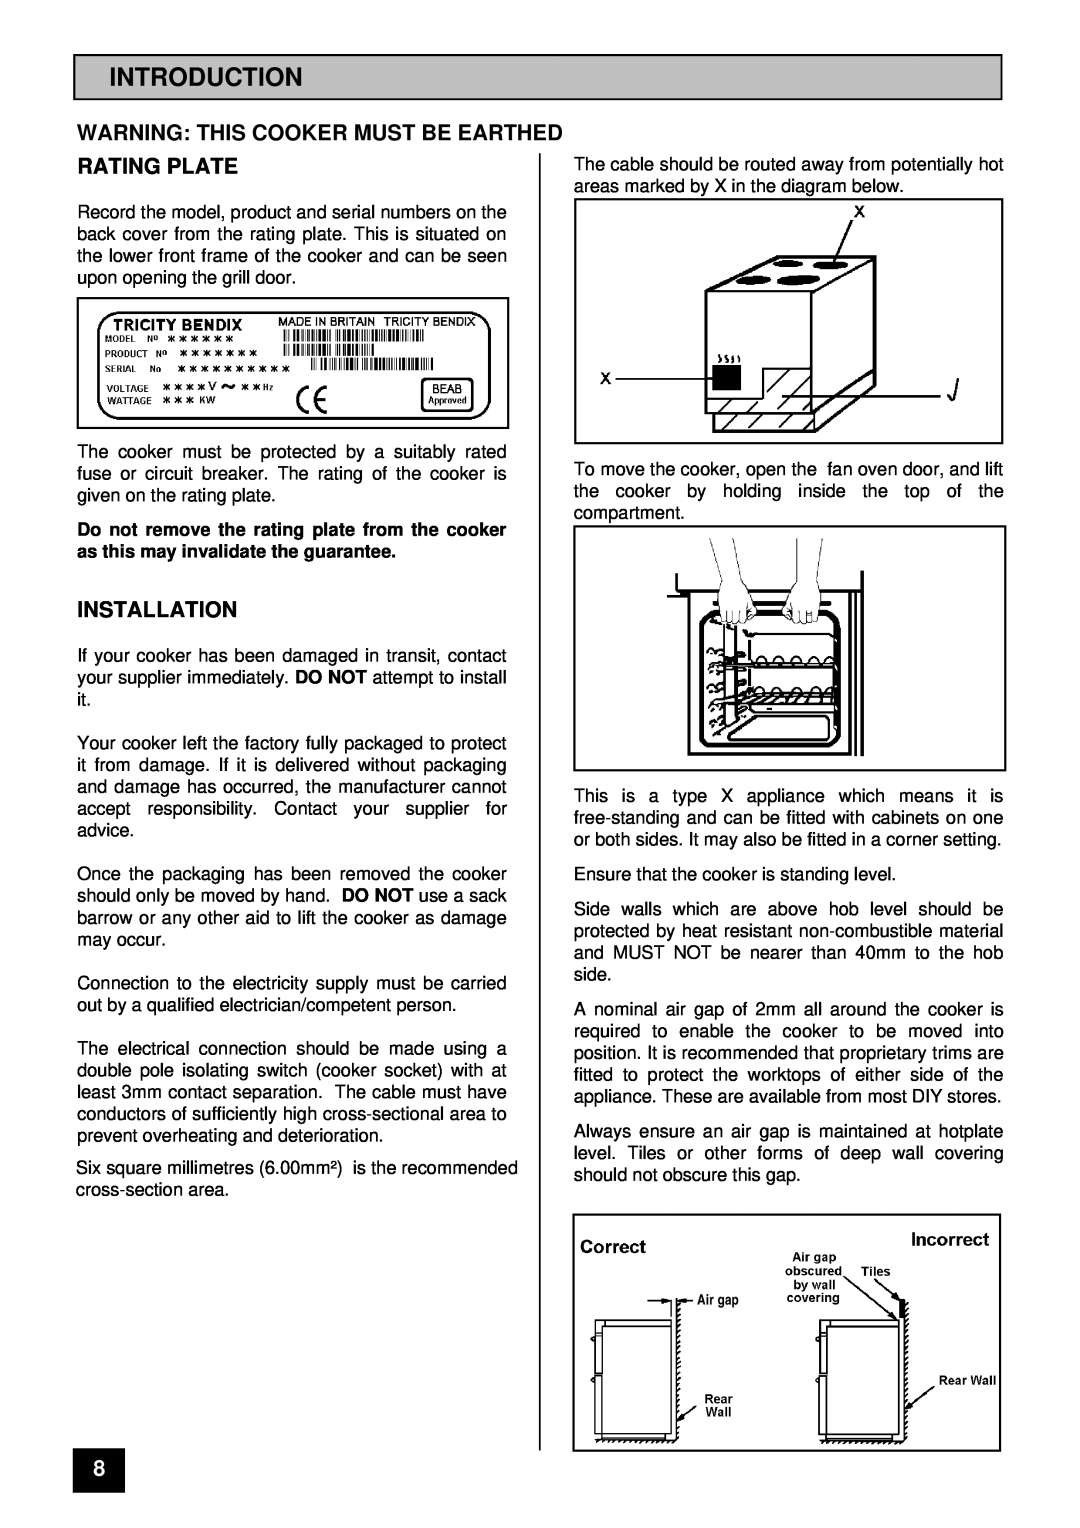 Tricity Bendix RE50M installation instructions Introduction, Warning This Cooker Must Be Earthed Rating Plate, Installation 